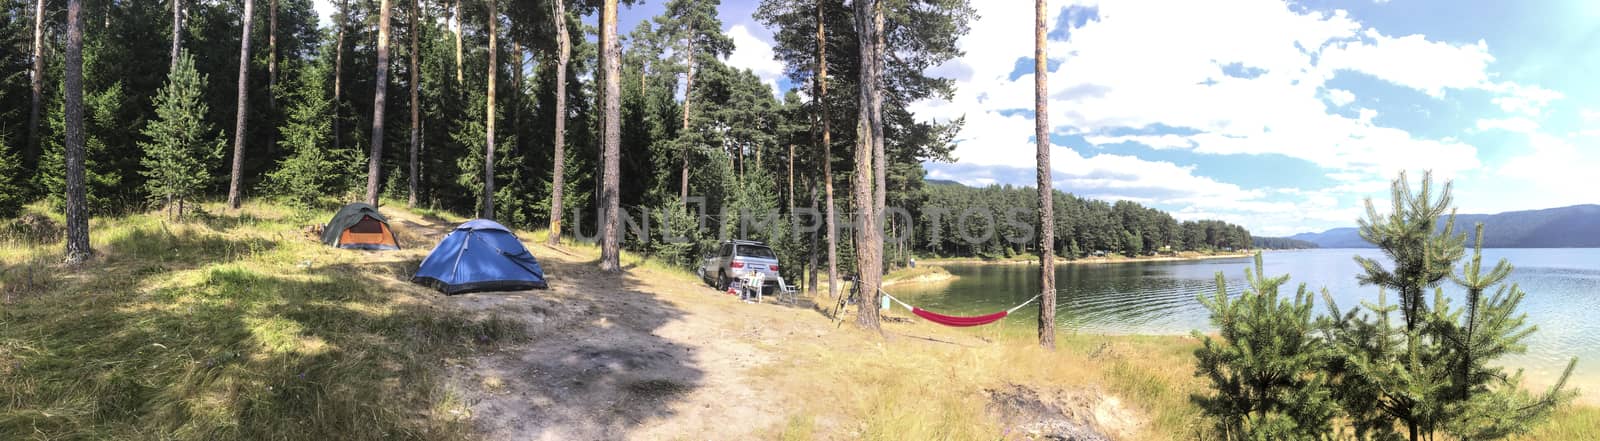 Panoramic image of forest and mountain lake. Tents and car in th by deyan_georgiev